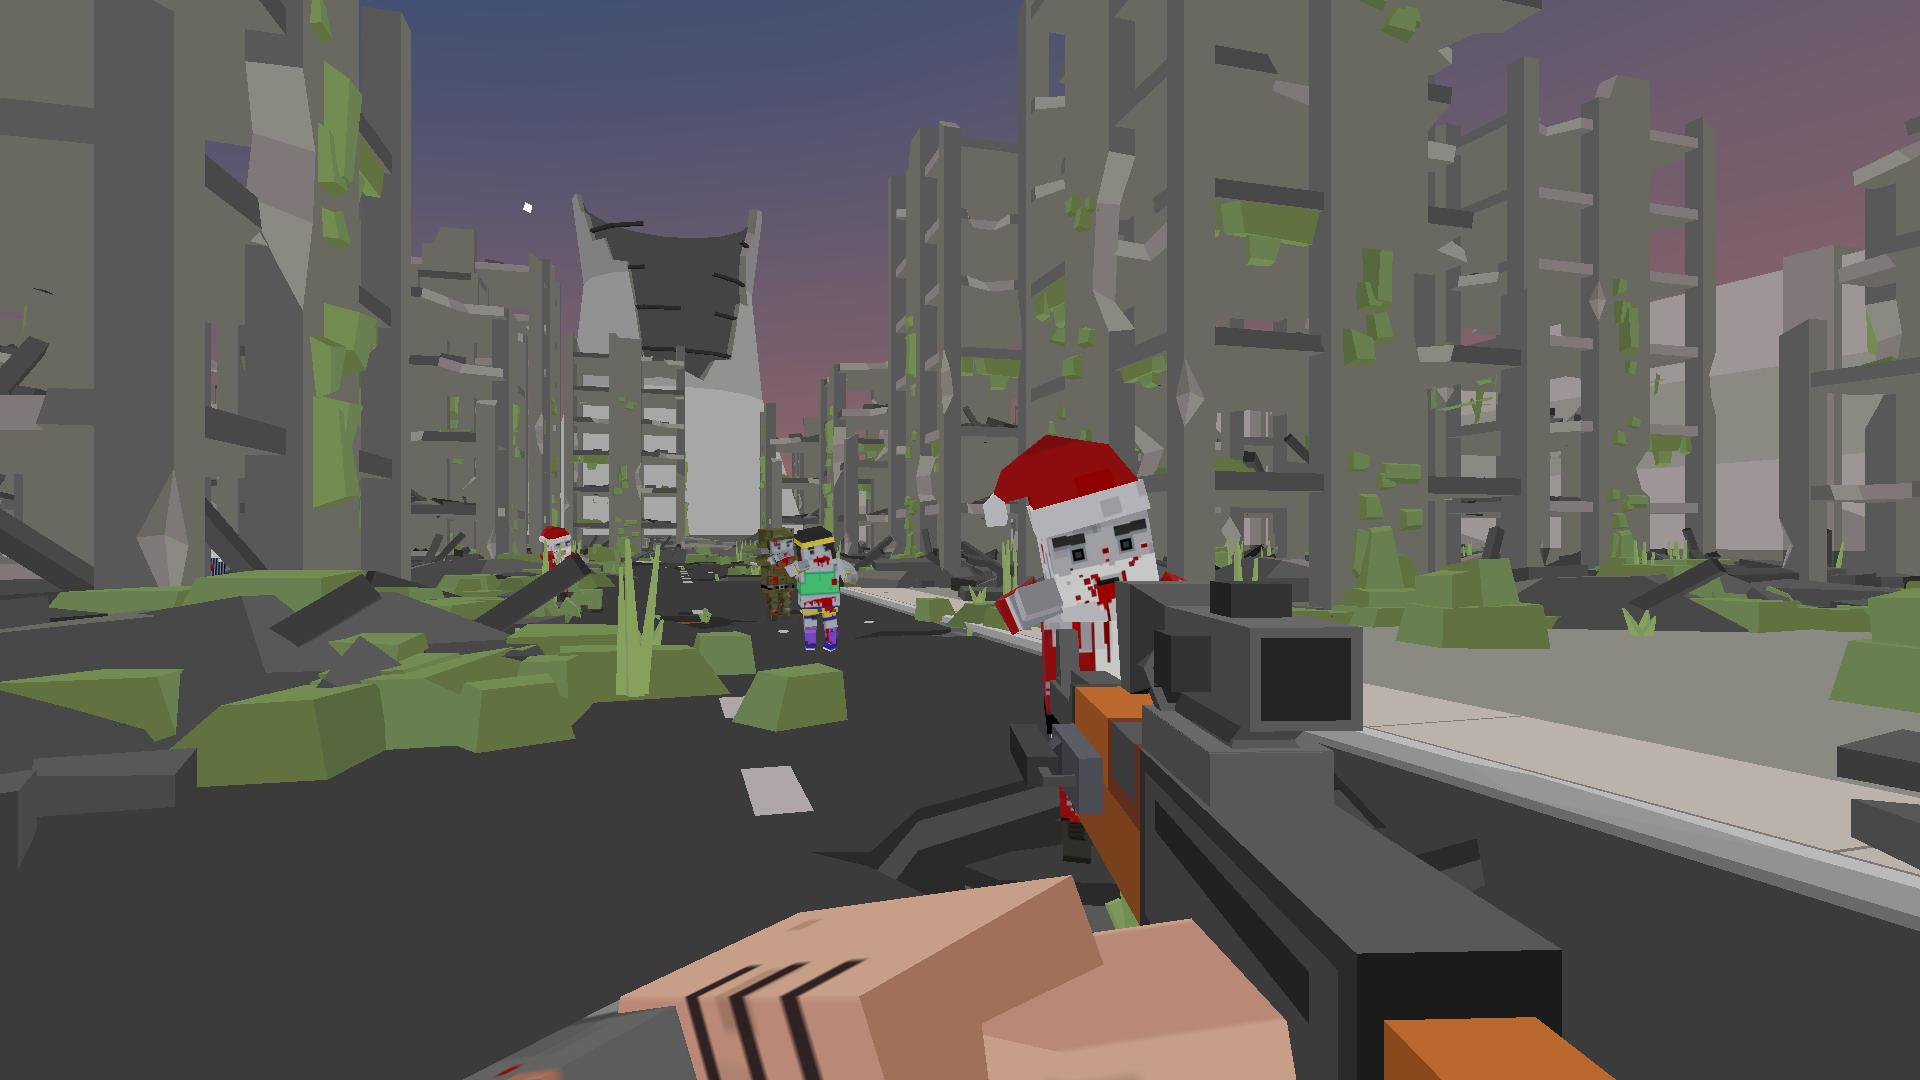 Multiplayer Zombie Survival Pixel 3d For Android Apk Download - 2 player zombie survival roblox